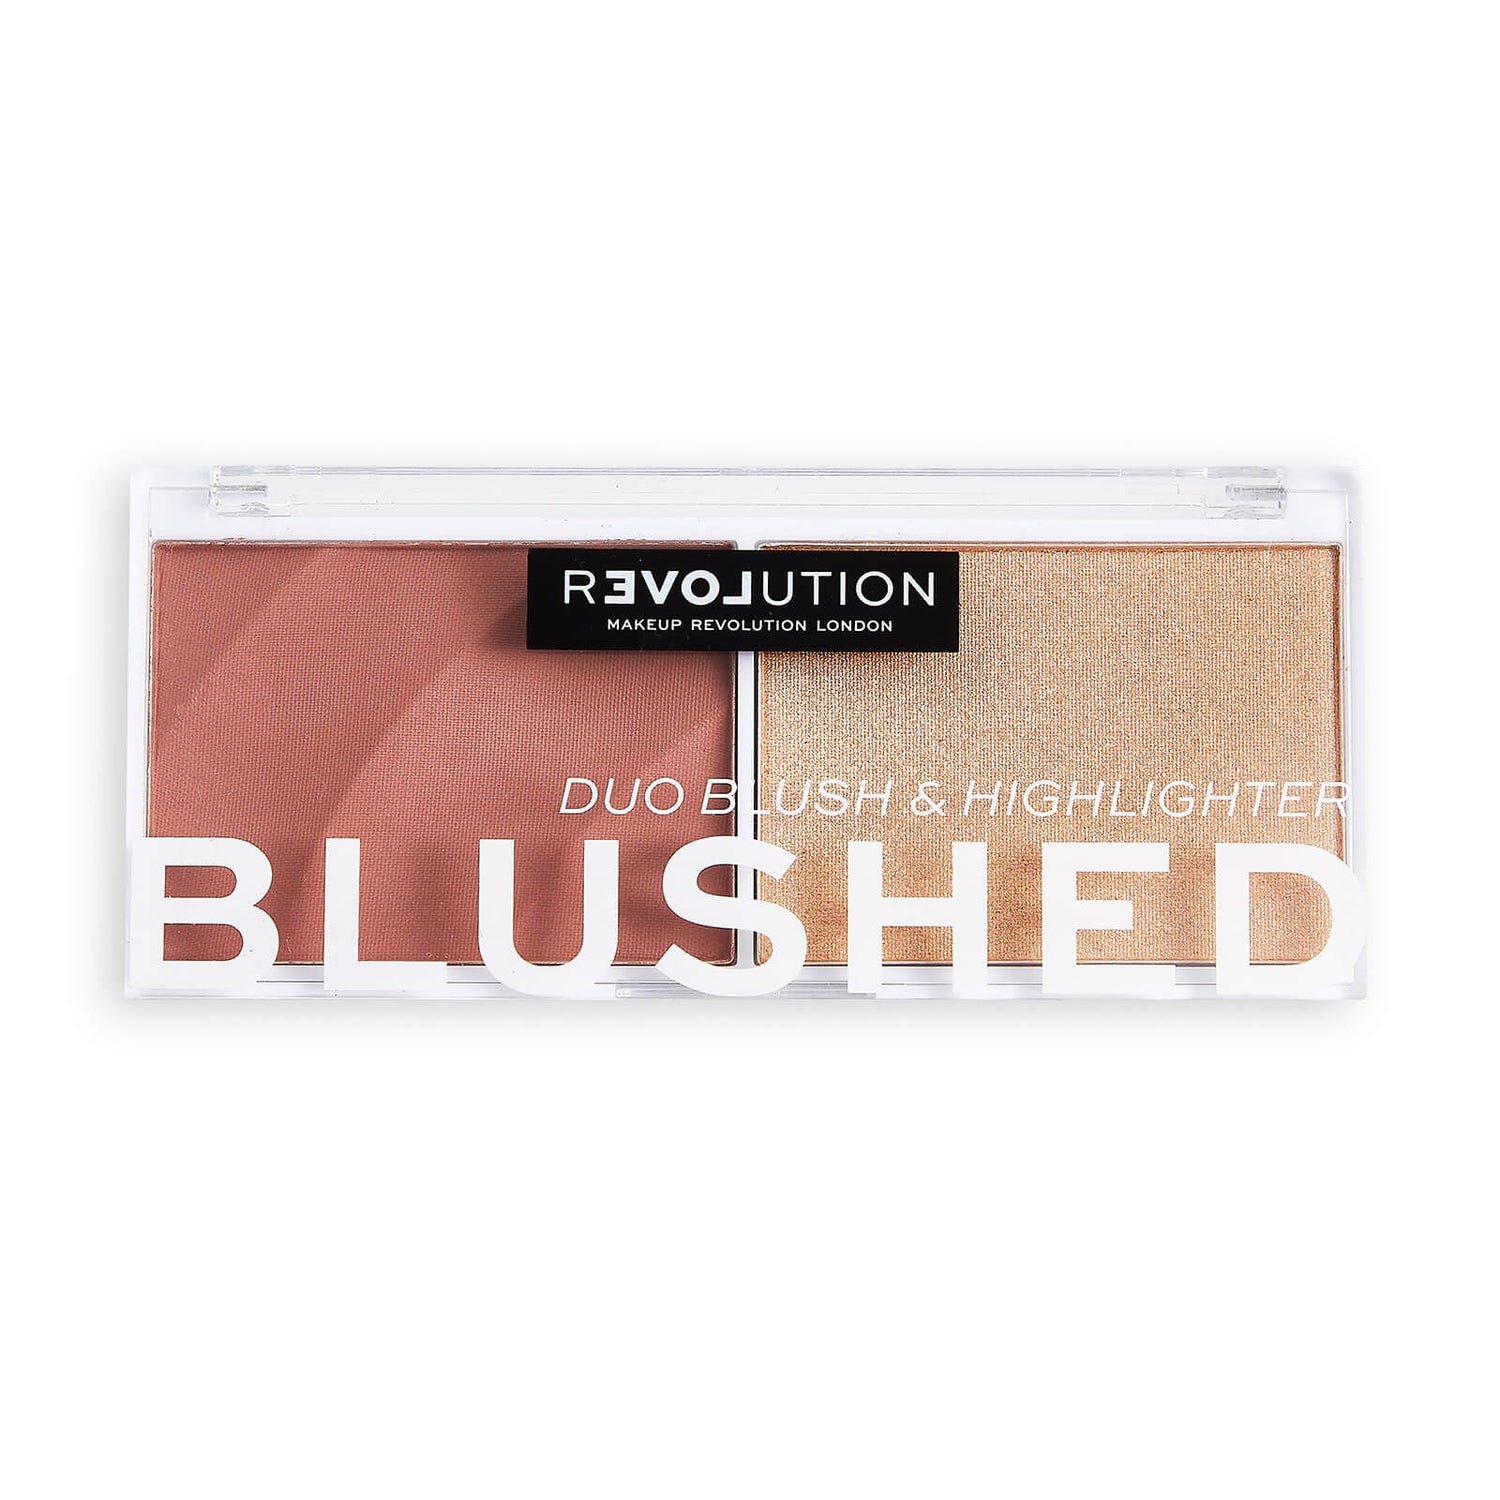 Relove Colour Play Blushed Duo Kindness